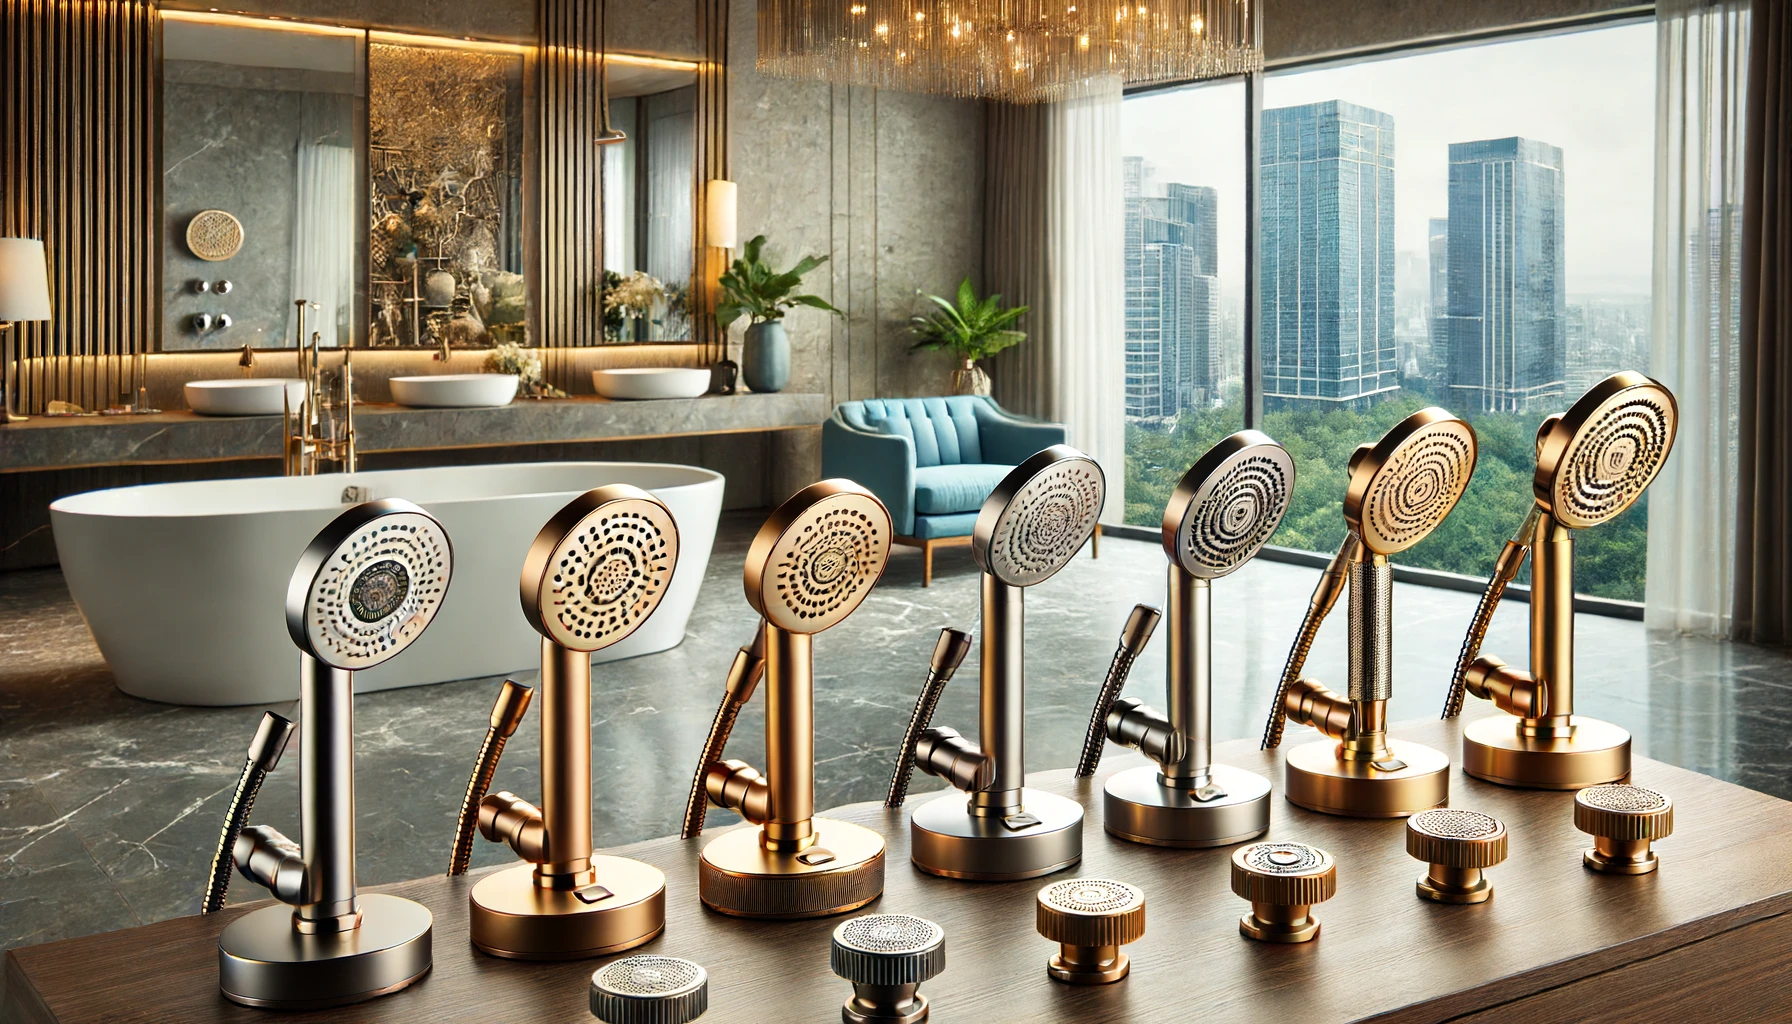 A detailed comparison of luxury handheld shower heads displayed on a table, showing different designs, materials, and features. The background is a modern, upscale bathroom.